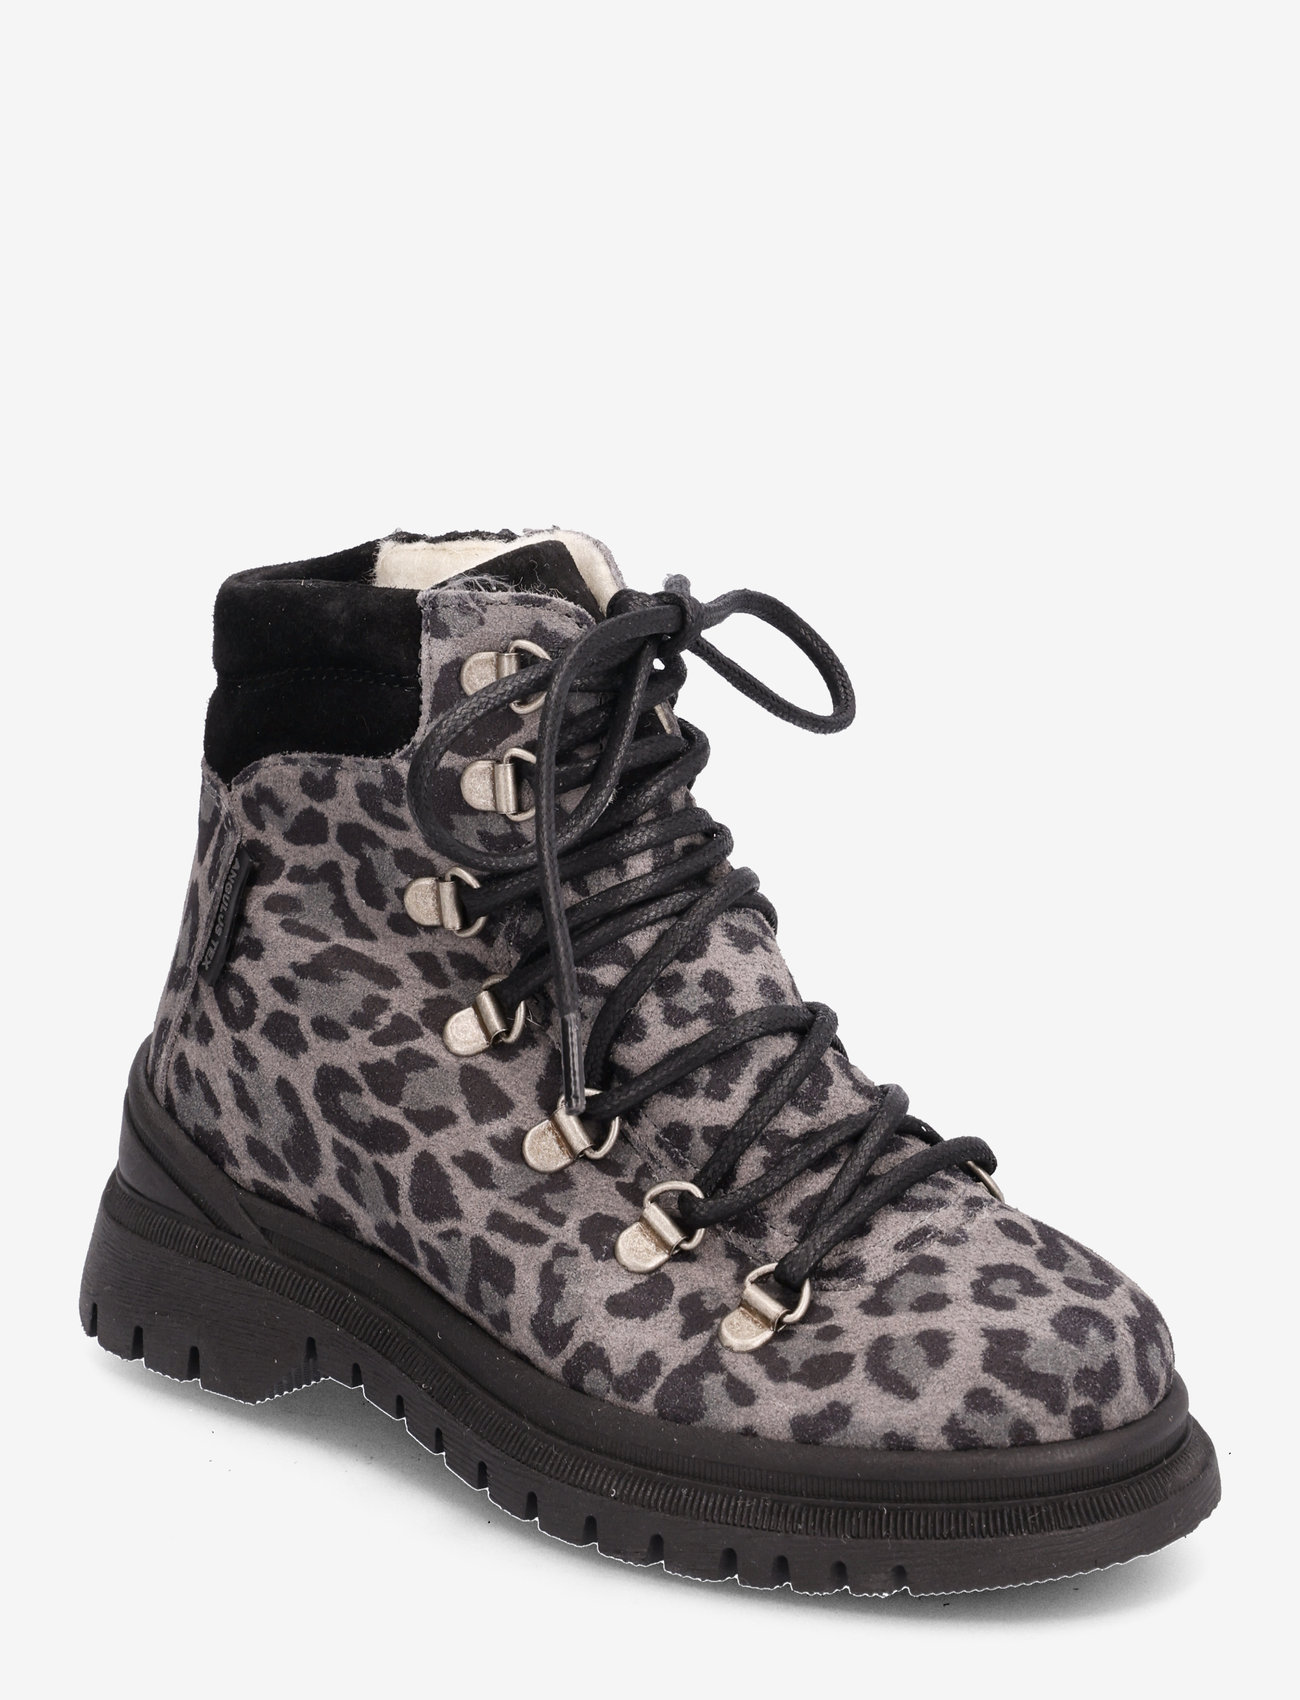 ANGULUS - Boots - flat - with lace and zip - lapset - 1750/1163 gray leopard/black - 0